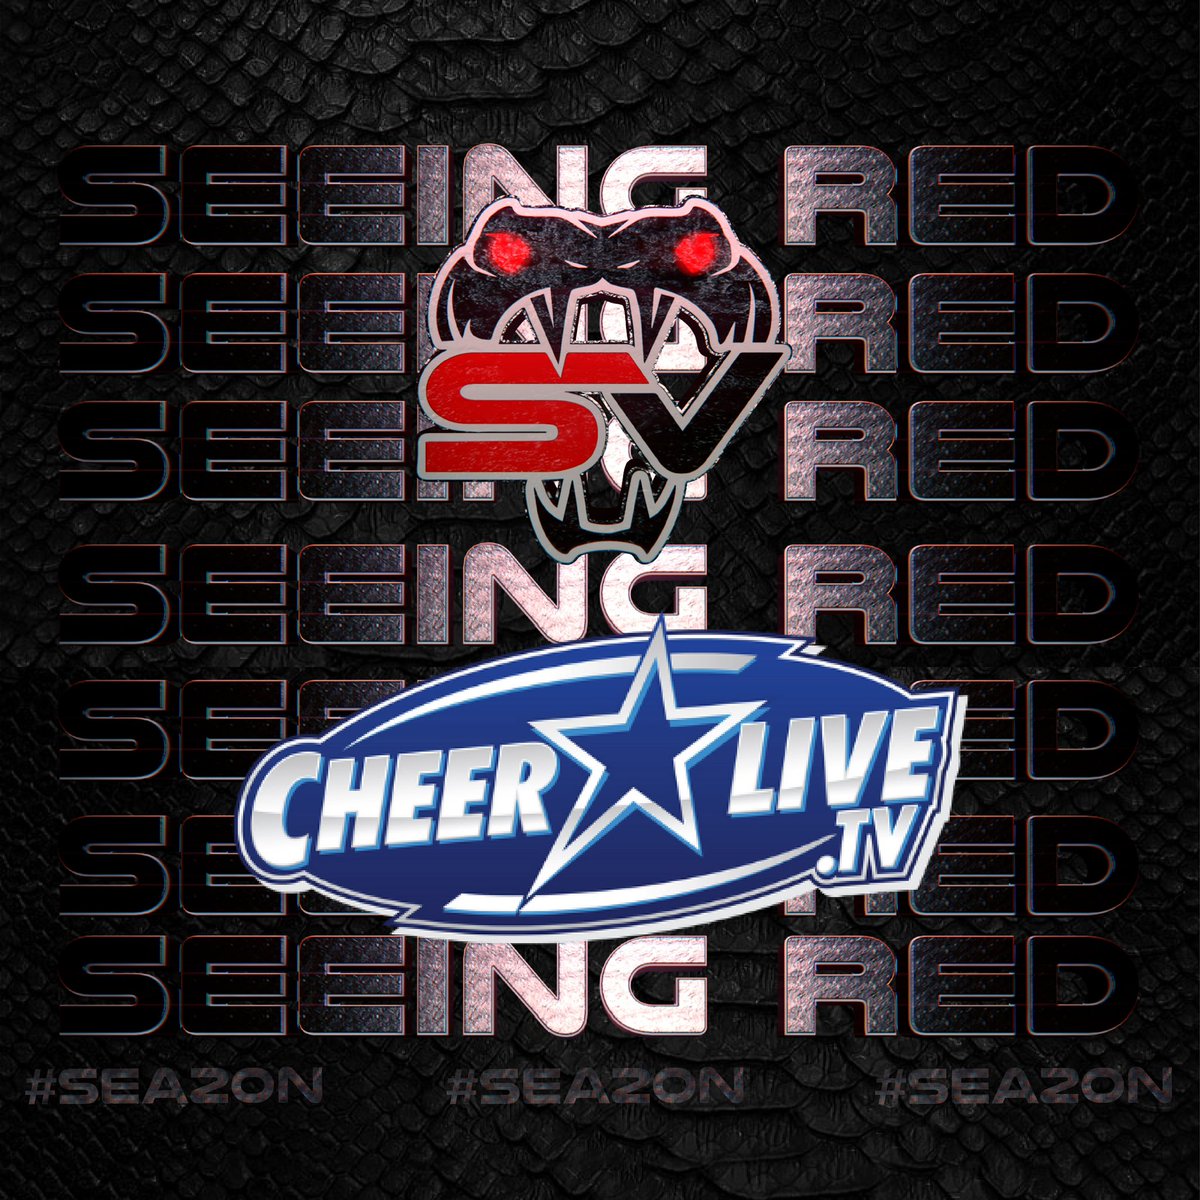 ‼️‼️ #SEEINGRED is now SOLD OUT ‼️‼️ But no worries you can Watch our Stars Vipers Showcase #SEEINGRED Live & On-Demand exclusively on CheerLive.TV! 🎥📺 🐍 📍 November 20th 🔗 Link in Bio 📌CheerLive.TV #SV #VIPERS #SVBIGGERTHANEVER #SEA20N